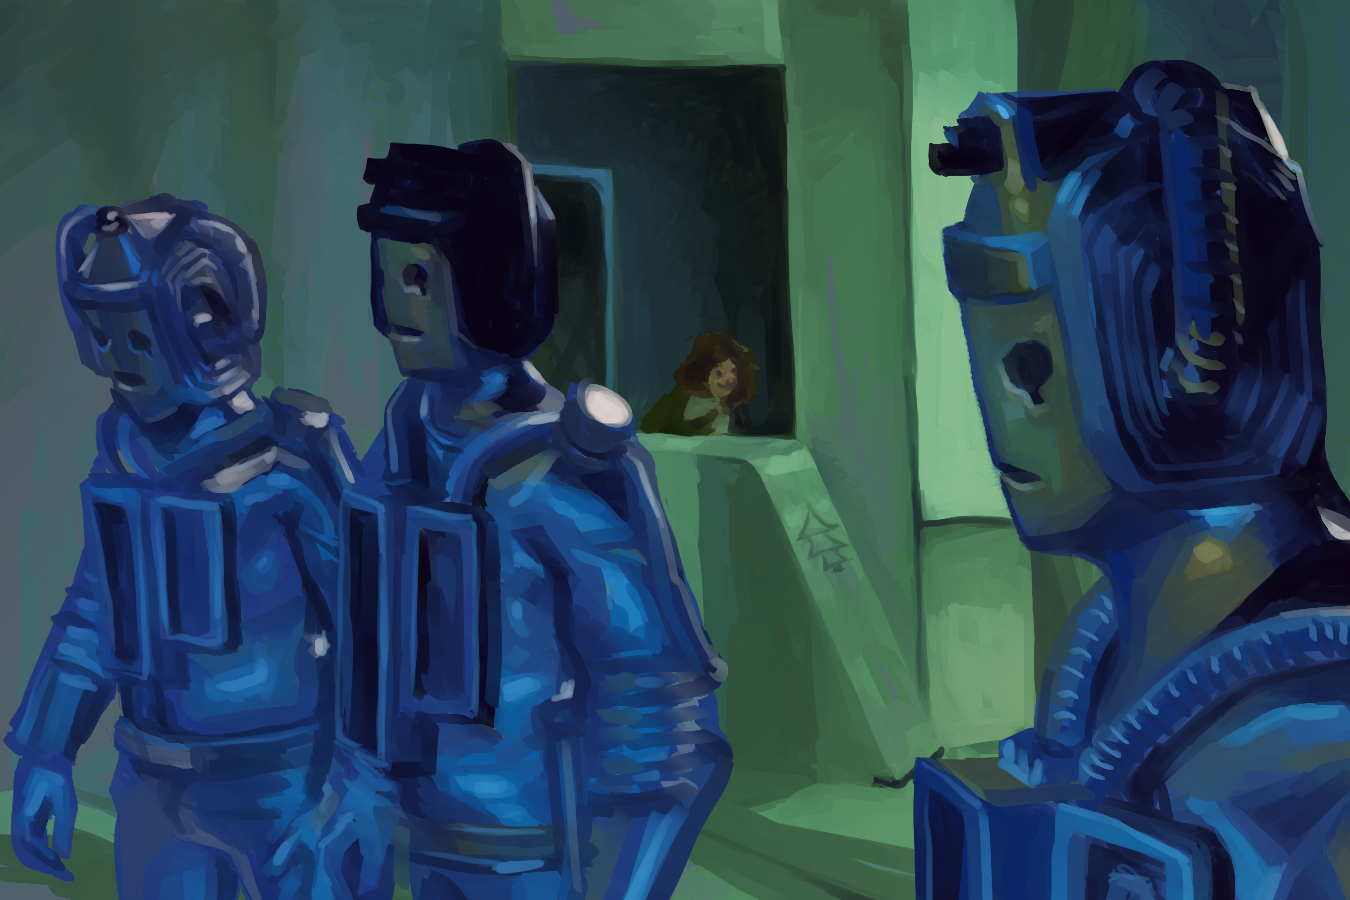 Digital painting study of a scene from Doctor Who. It shows three Cybermen standing looking off screen lit up blue. The Cybermen are robot-like shiny silver men with unmoving metal faces. Behind them is a short wall, behind which a girl with long brown hair and a green jacket is sneaking (and that girl? Sarah Jane Smith).